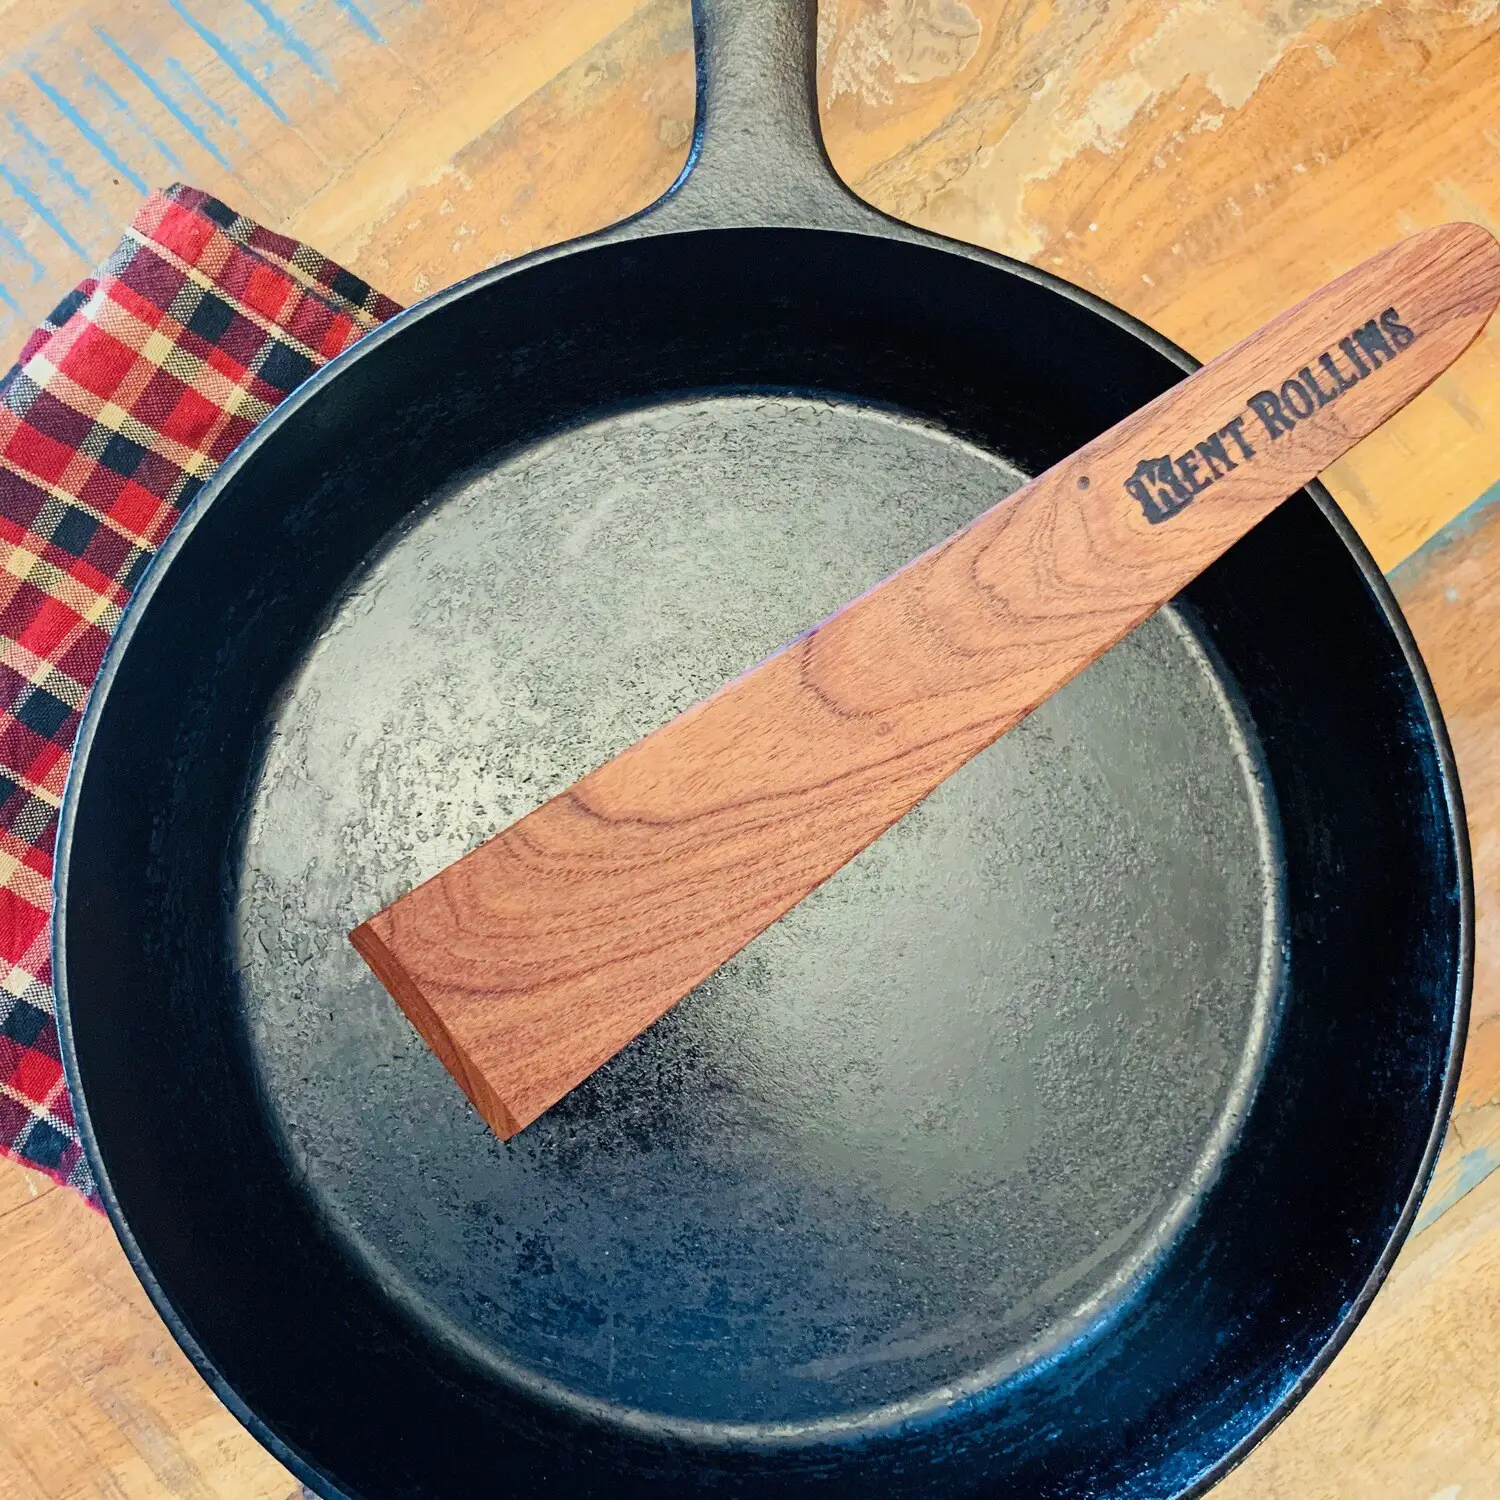 Kent Rollins - If you're just starting out on cast iron, I don't recommend  seasoning with a paper towel. Paper towels can leave lint behind. Instead,  try a lint free cloth. Bandanas